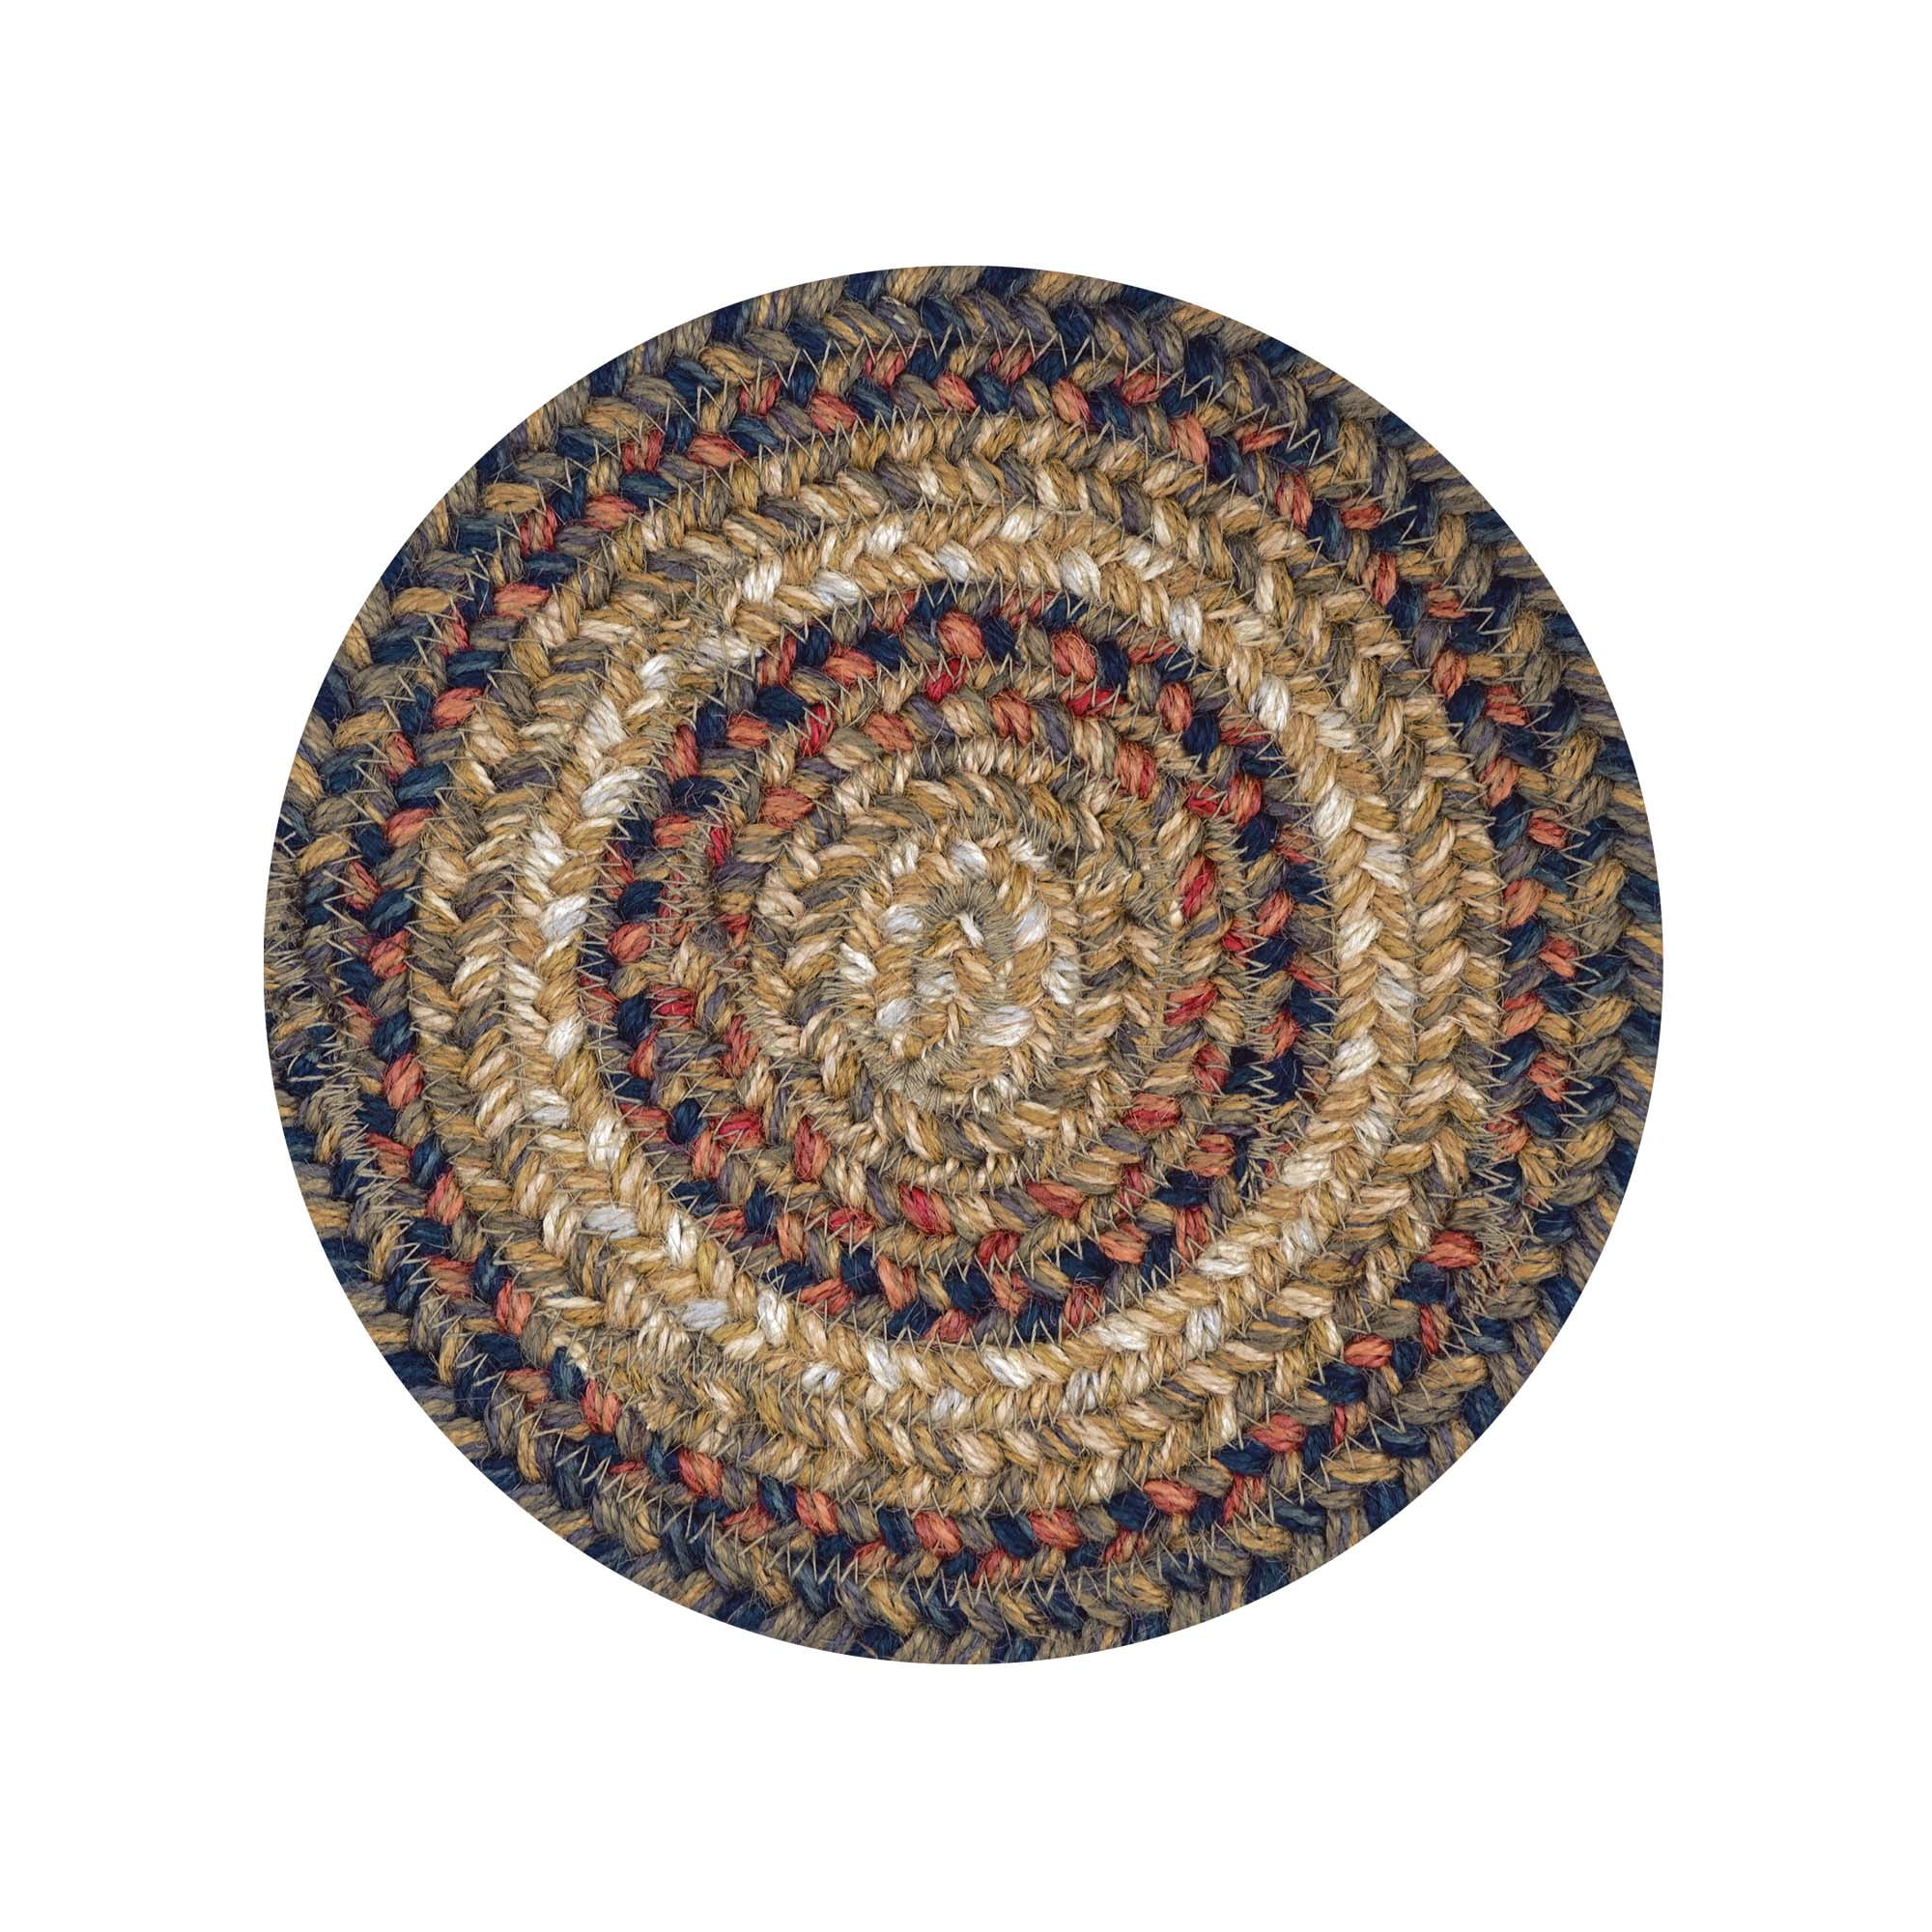 Natural Braided Jute Rustic Table Bedside Round Placemat Trivet Farmhouse Set 